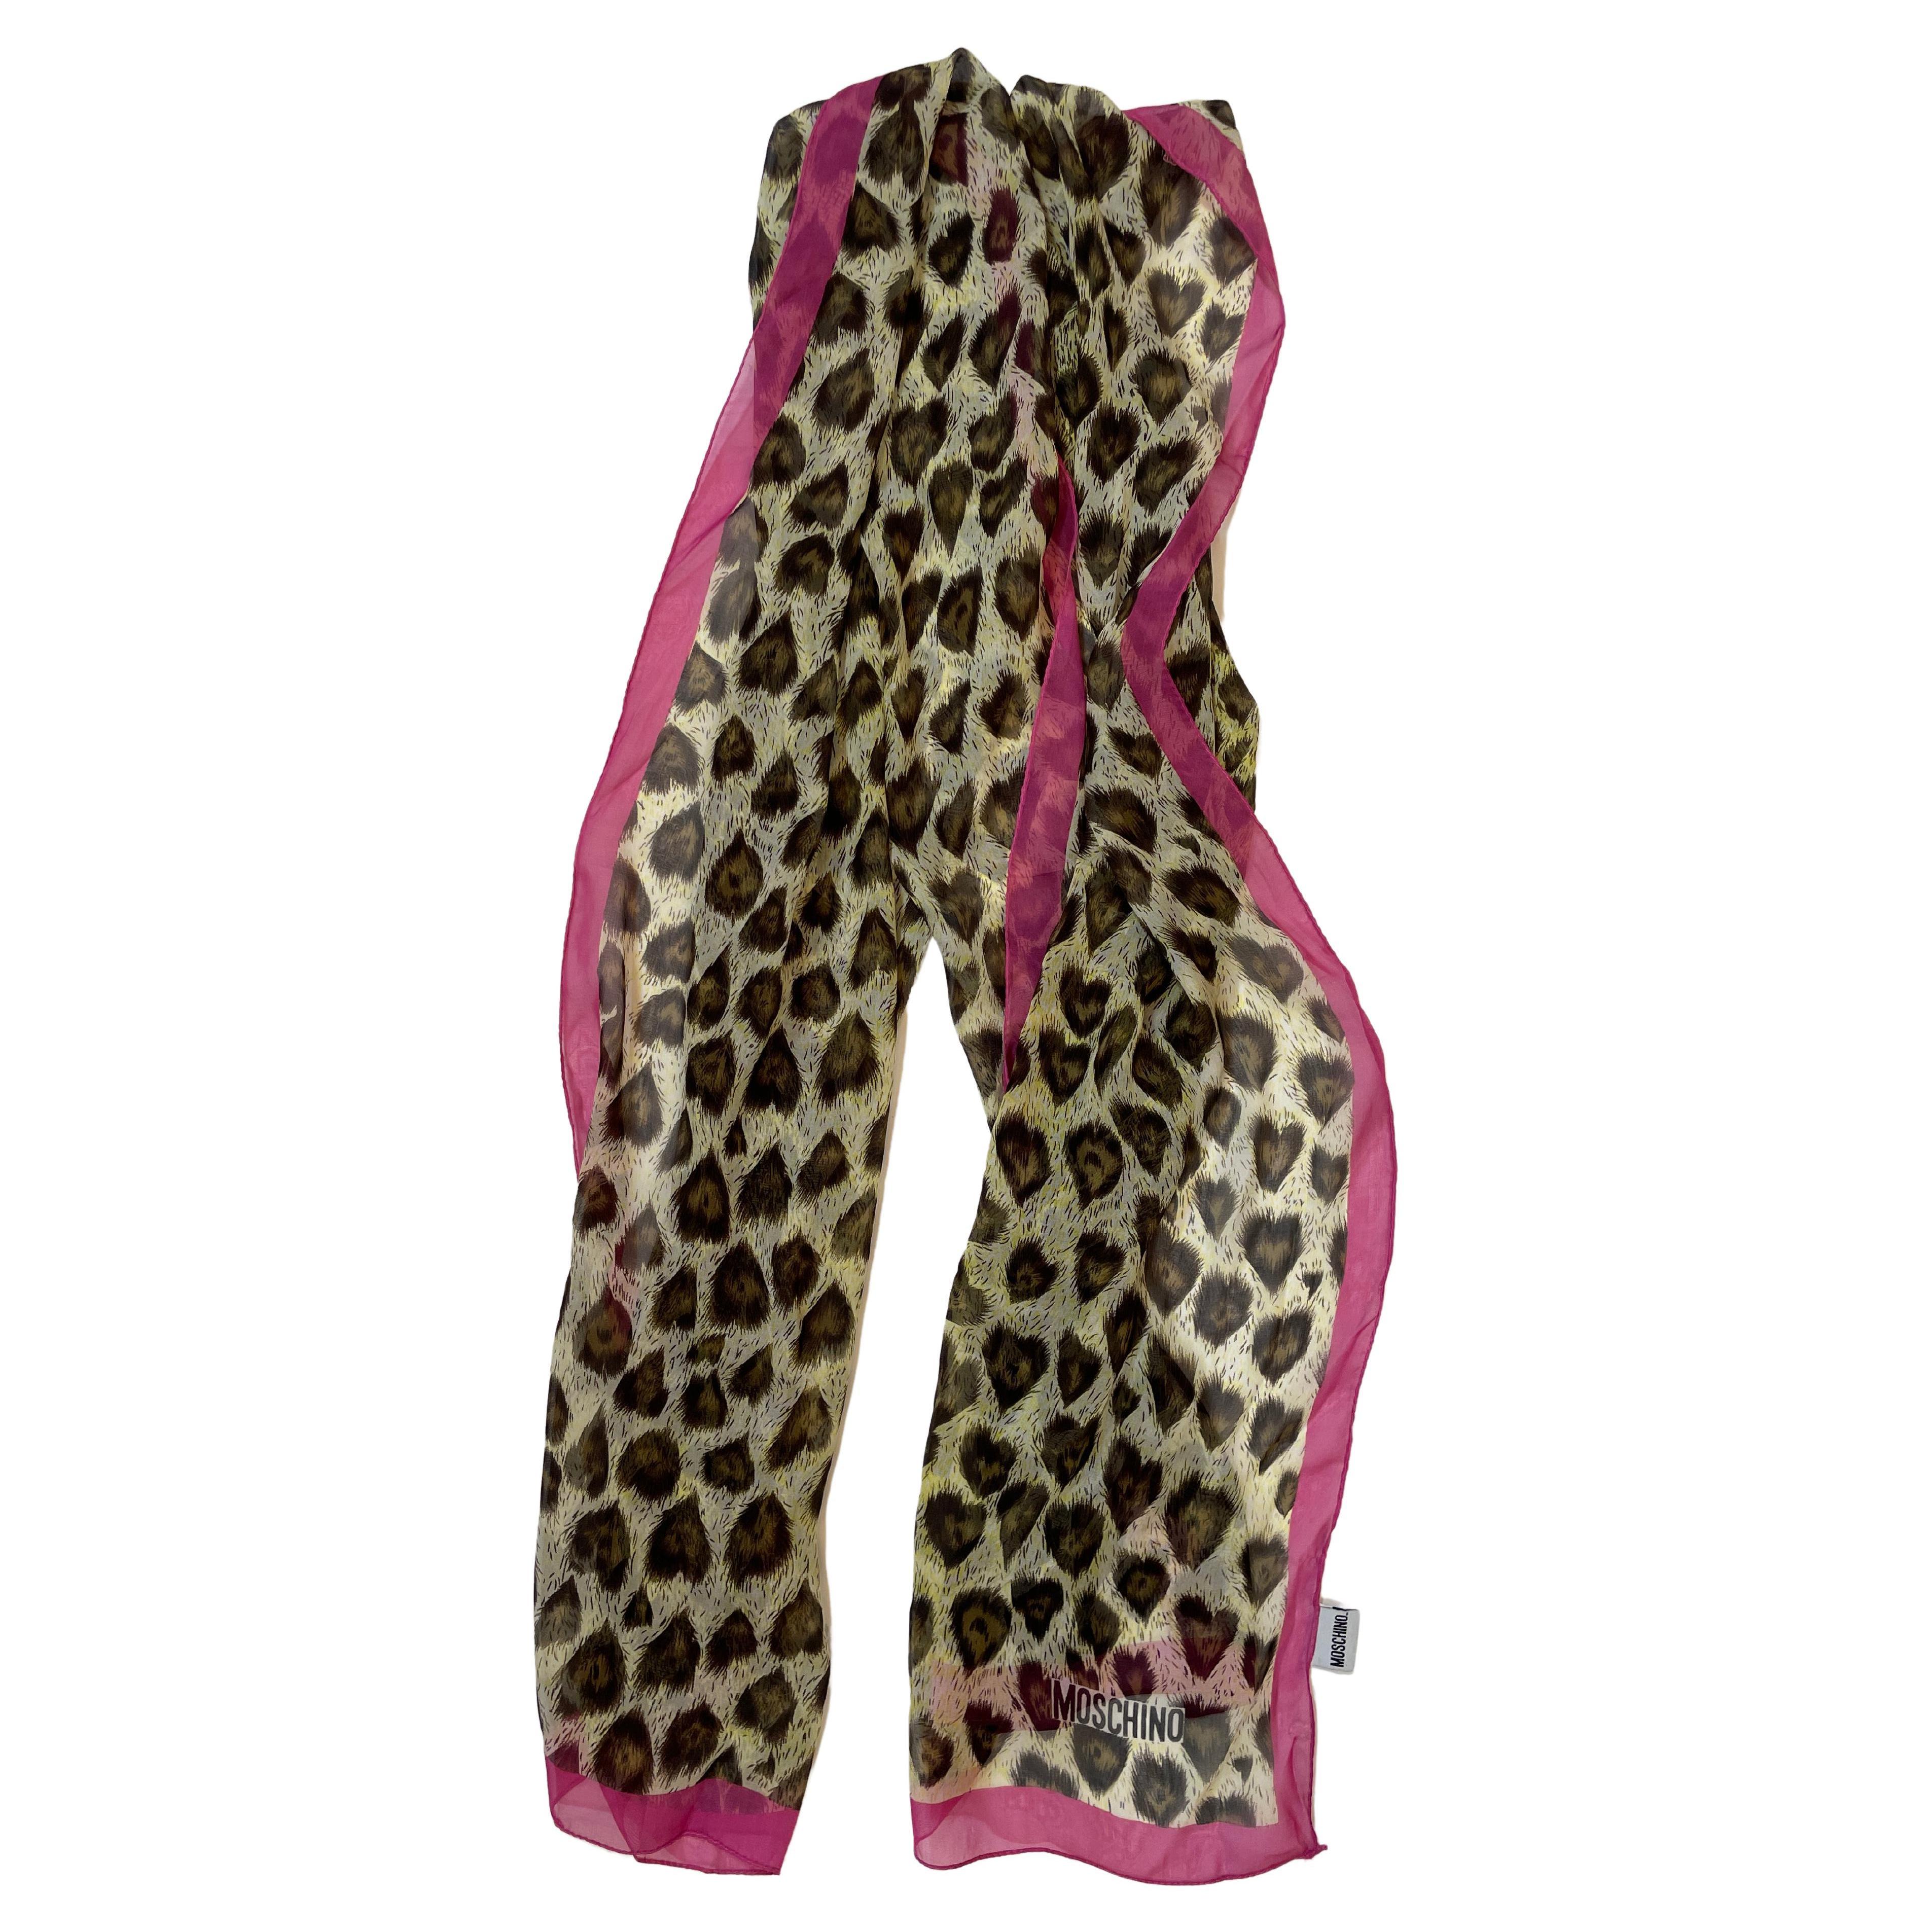 Moschino Animal Print Silk Scarf Made In Italy Pink And Brown 1990s Head Wrap For Sale